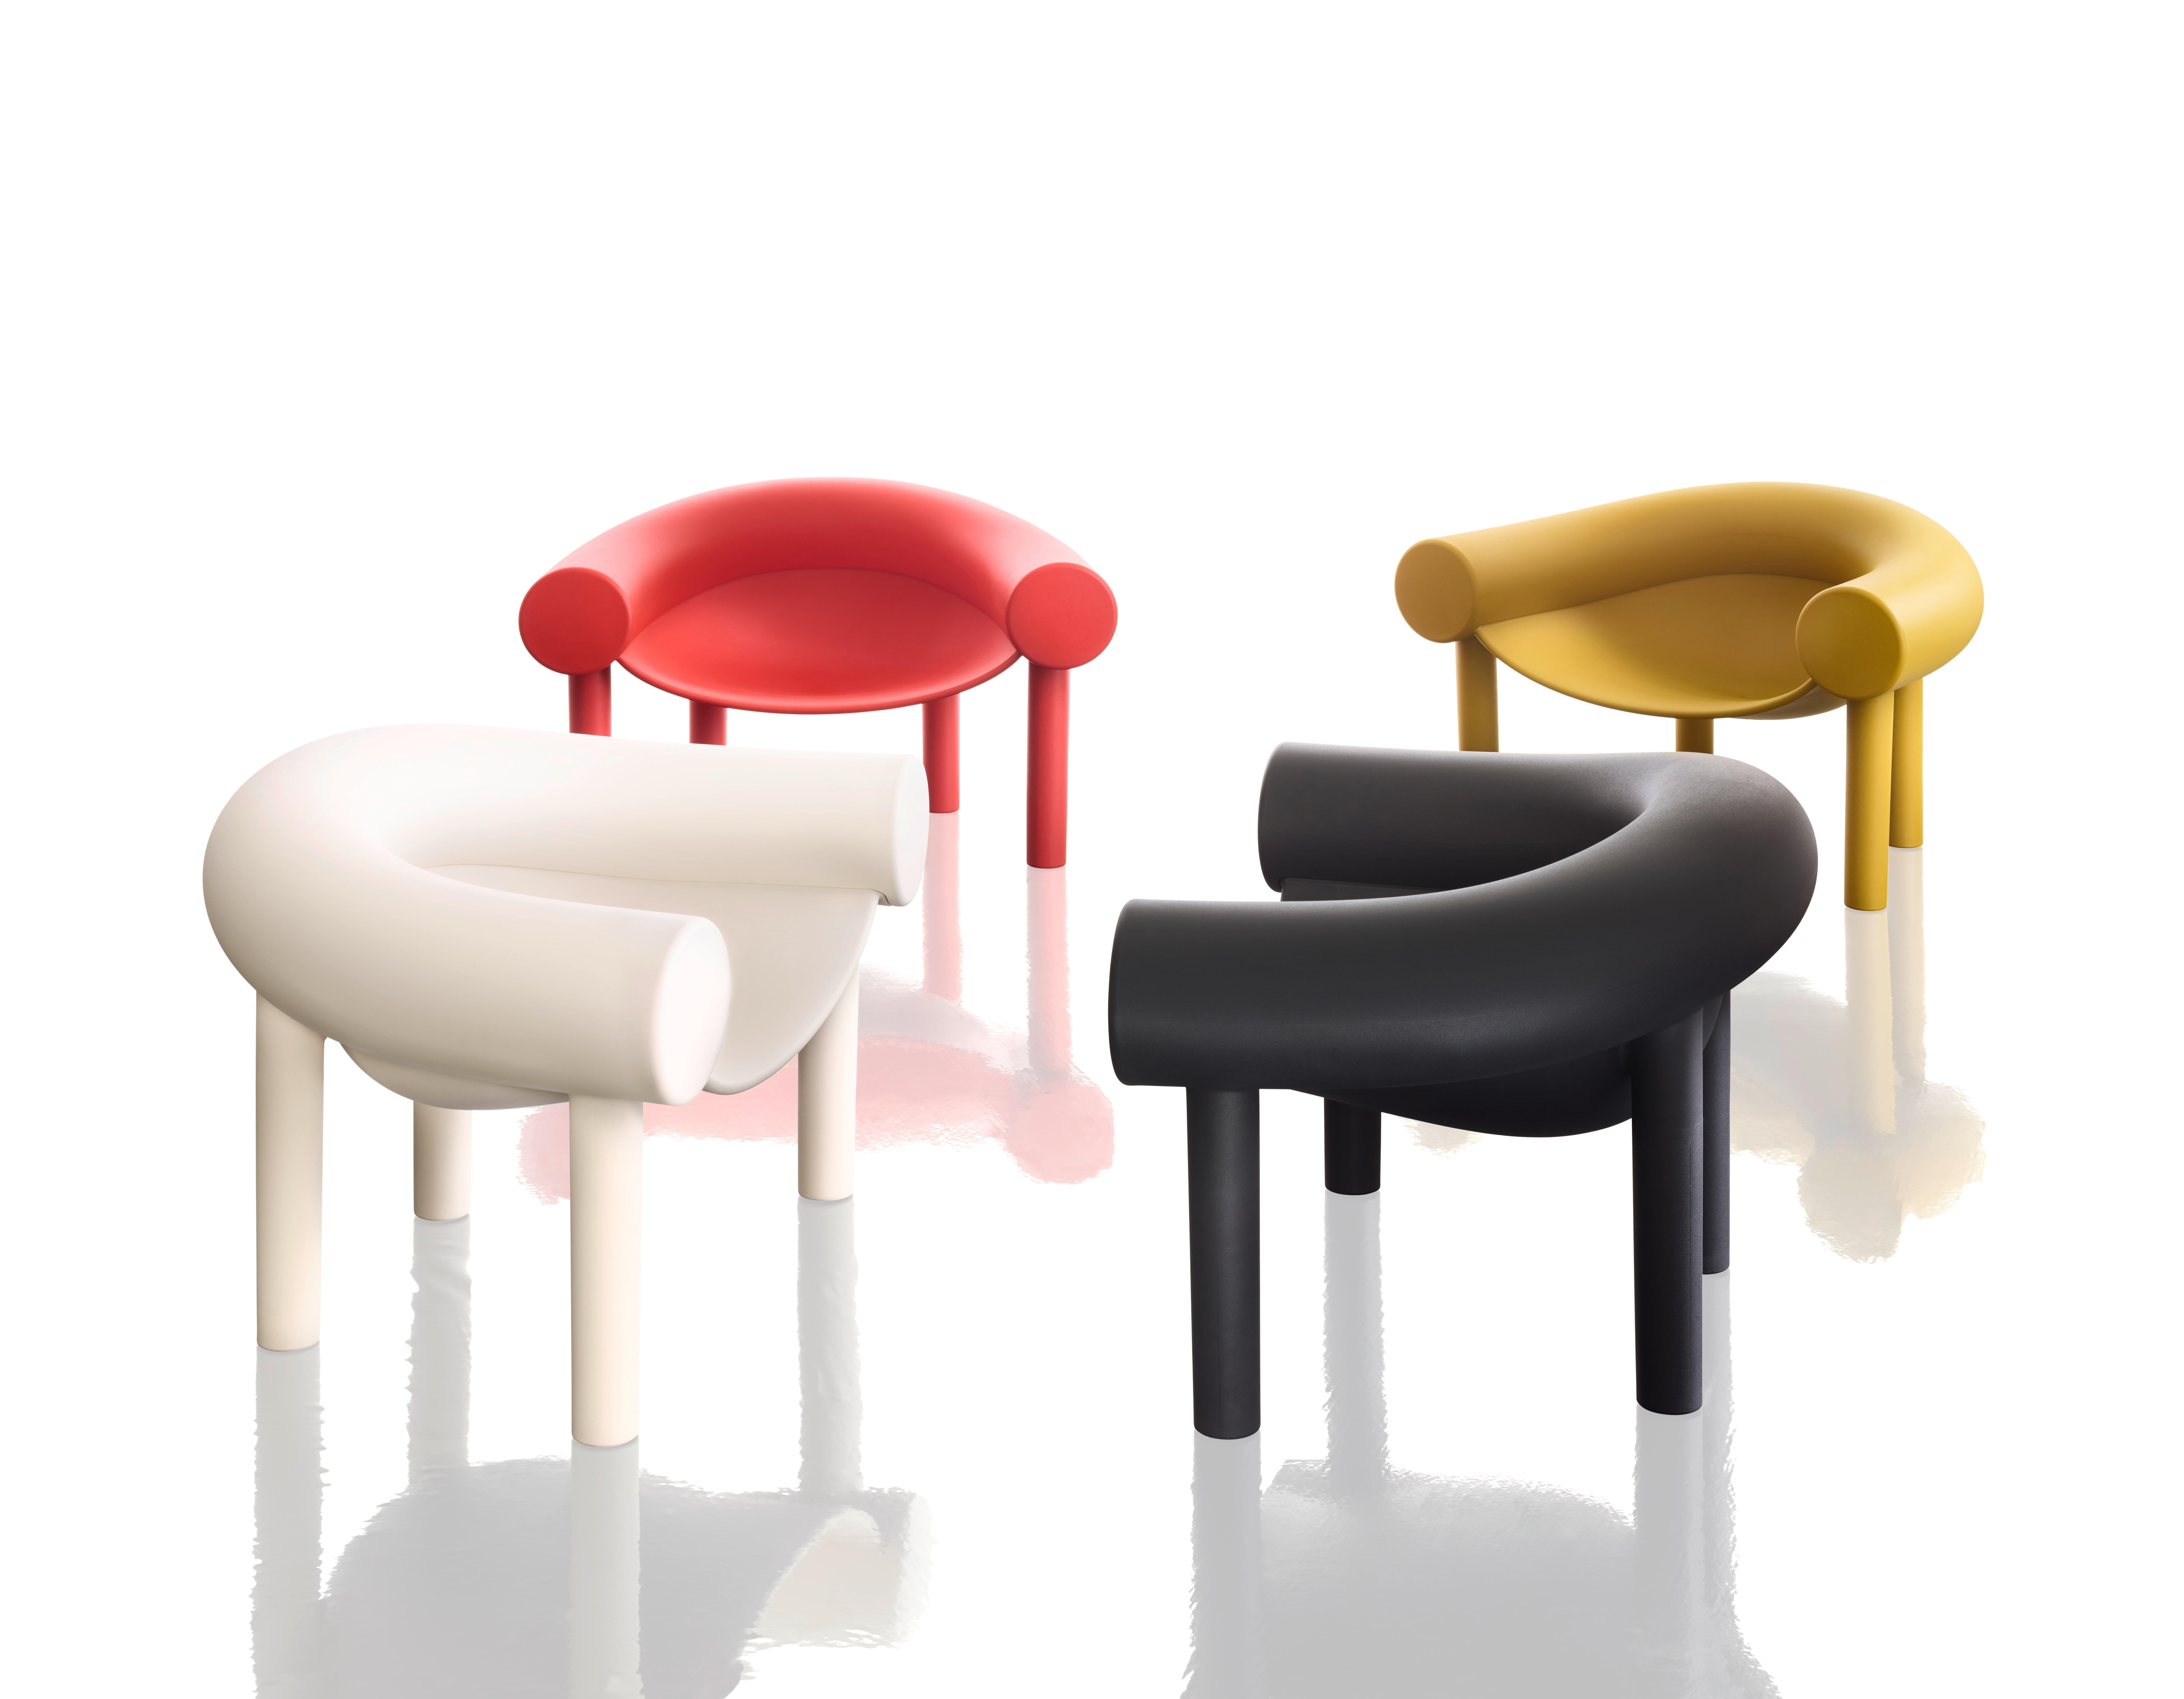 Sam Son is an easy armchair with a hint of a cartoon character. Supported on four stilt legs, the armchair features a softly suspended seat shell between a giant, horseshoe-shaped element, the chair’s characteristic armrest and backrest.
Made from